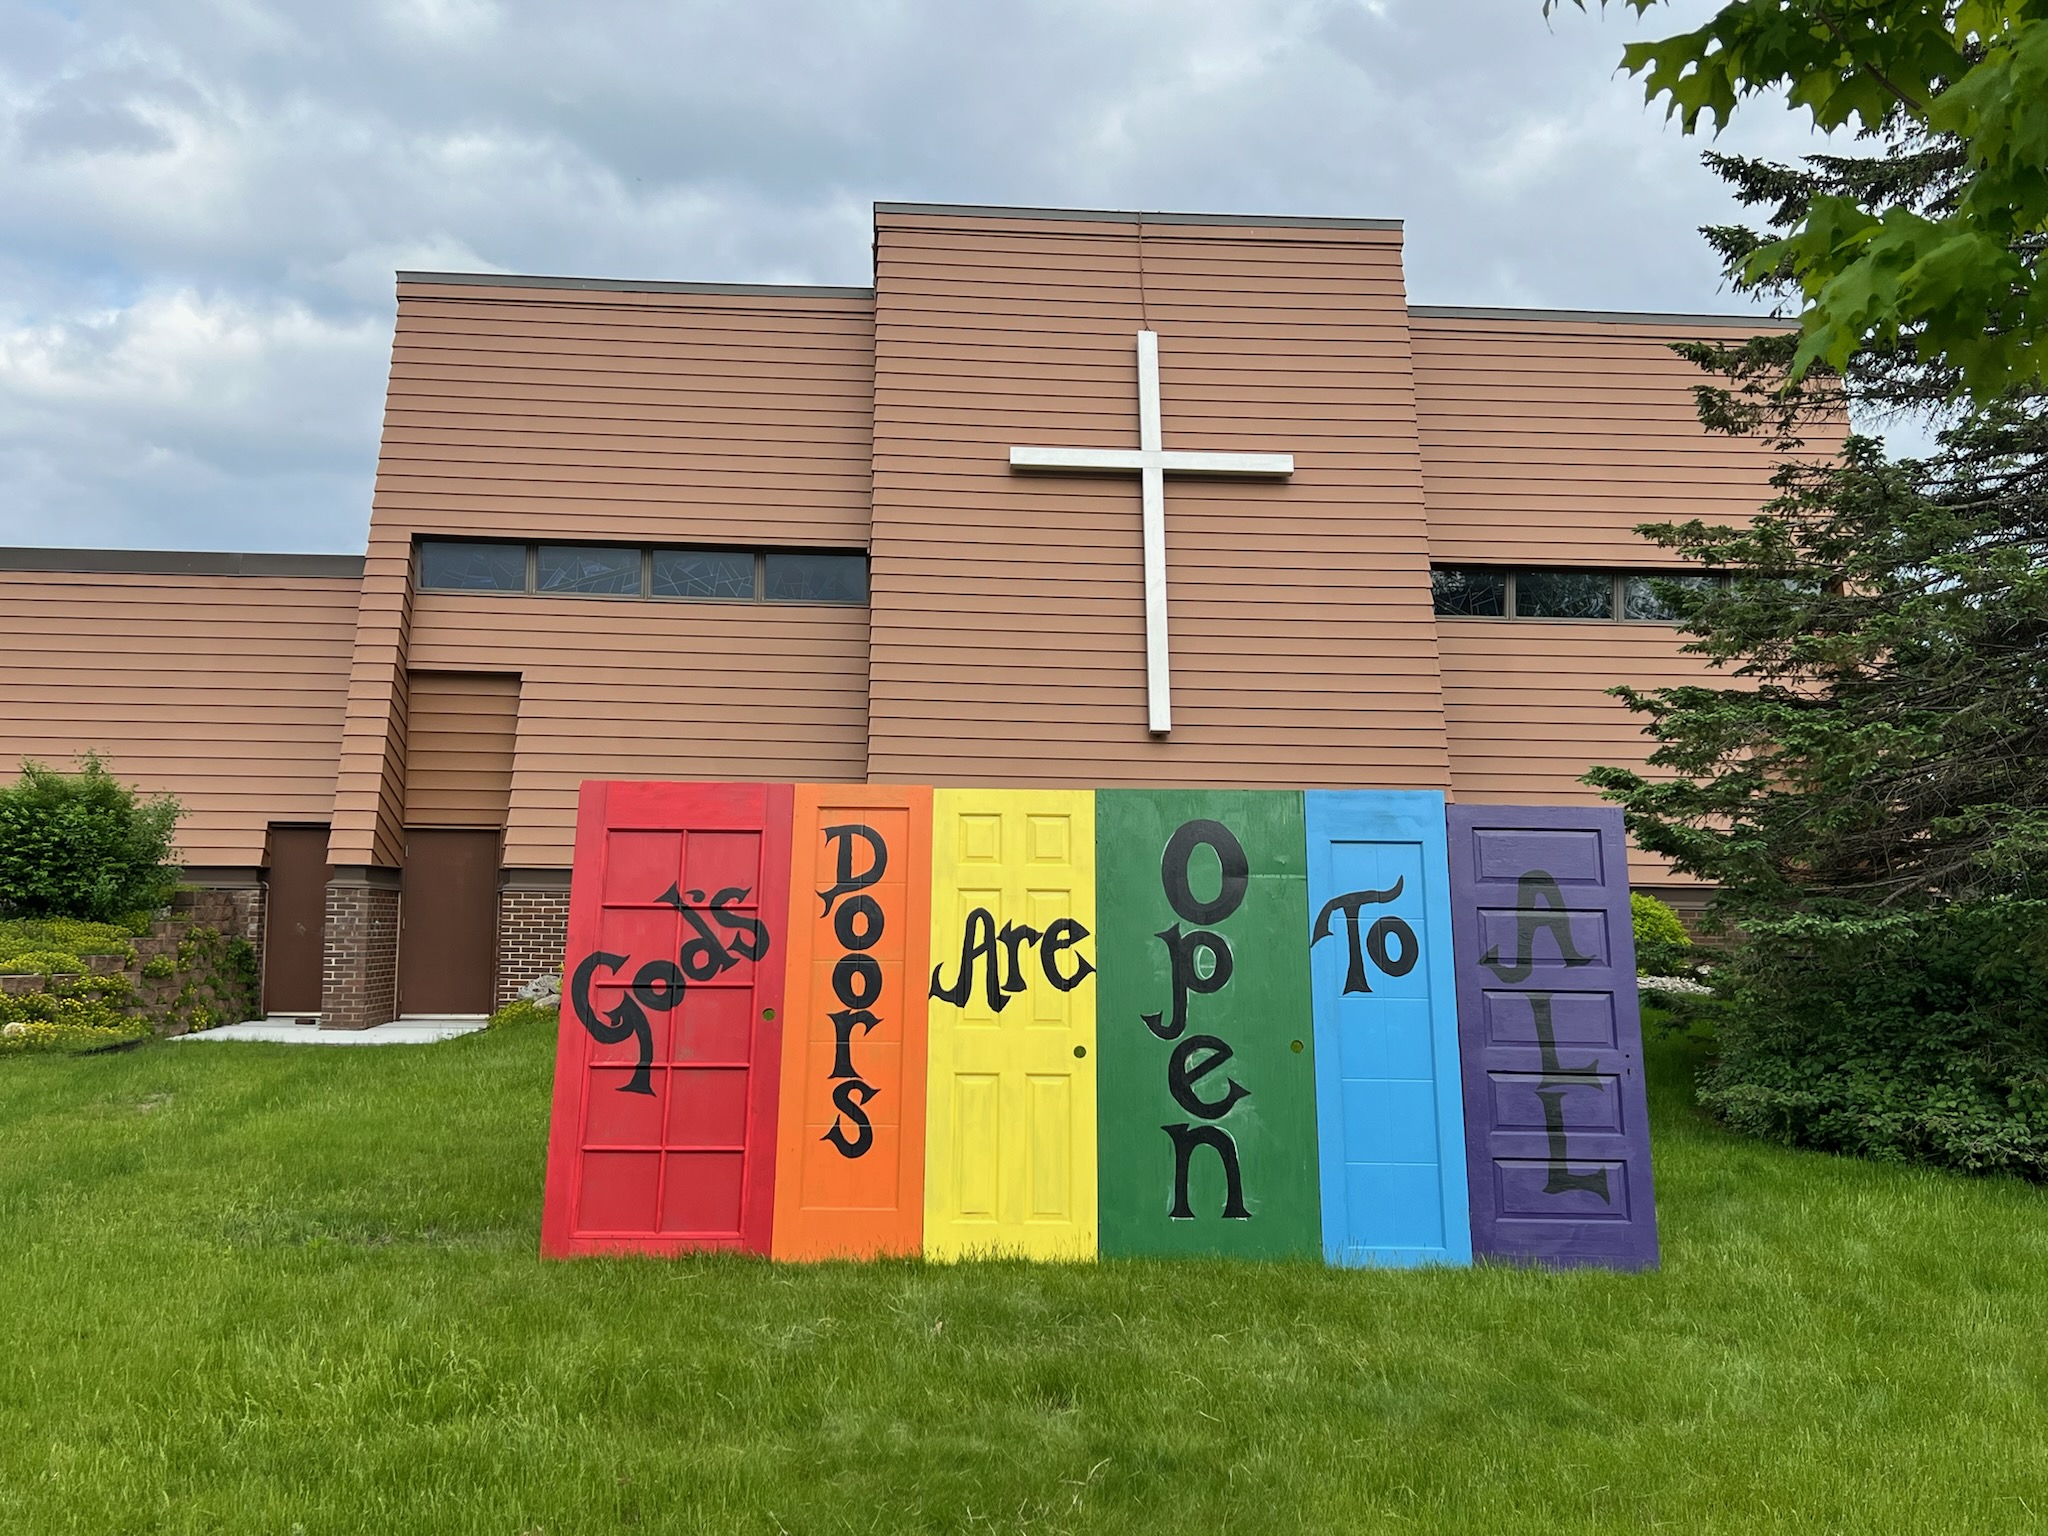 Rainbow painted doors with the text "God's Doors are Open to All"